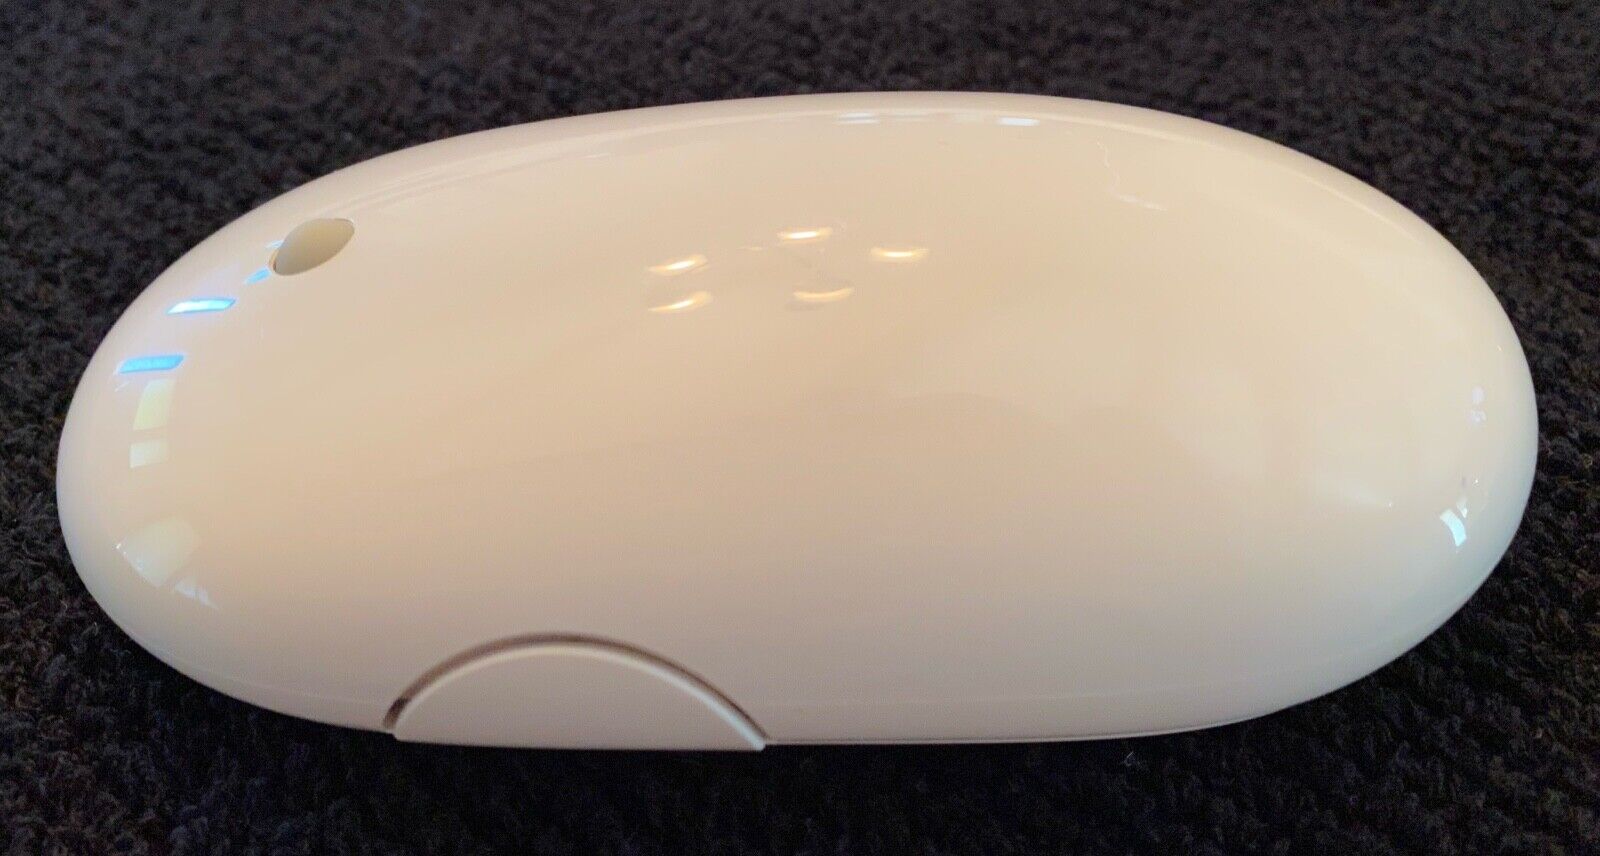 Vintage: Genuine OEM Apple A1197 Bluetooth Wireless Optical Mighty Mouse 